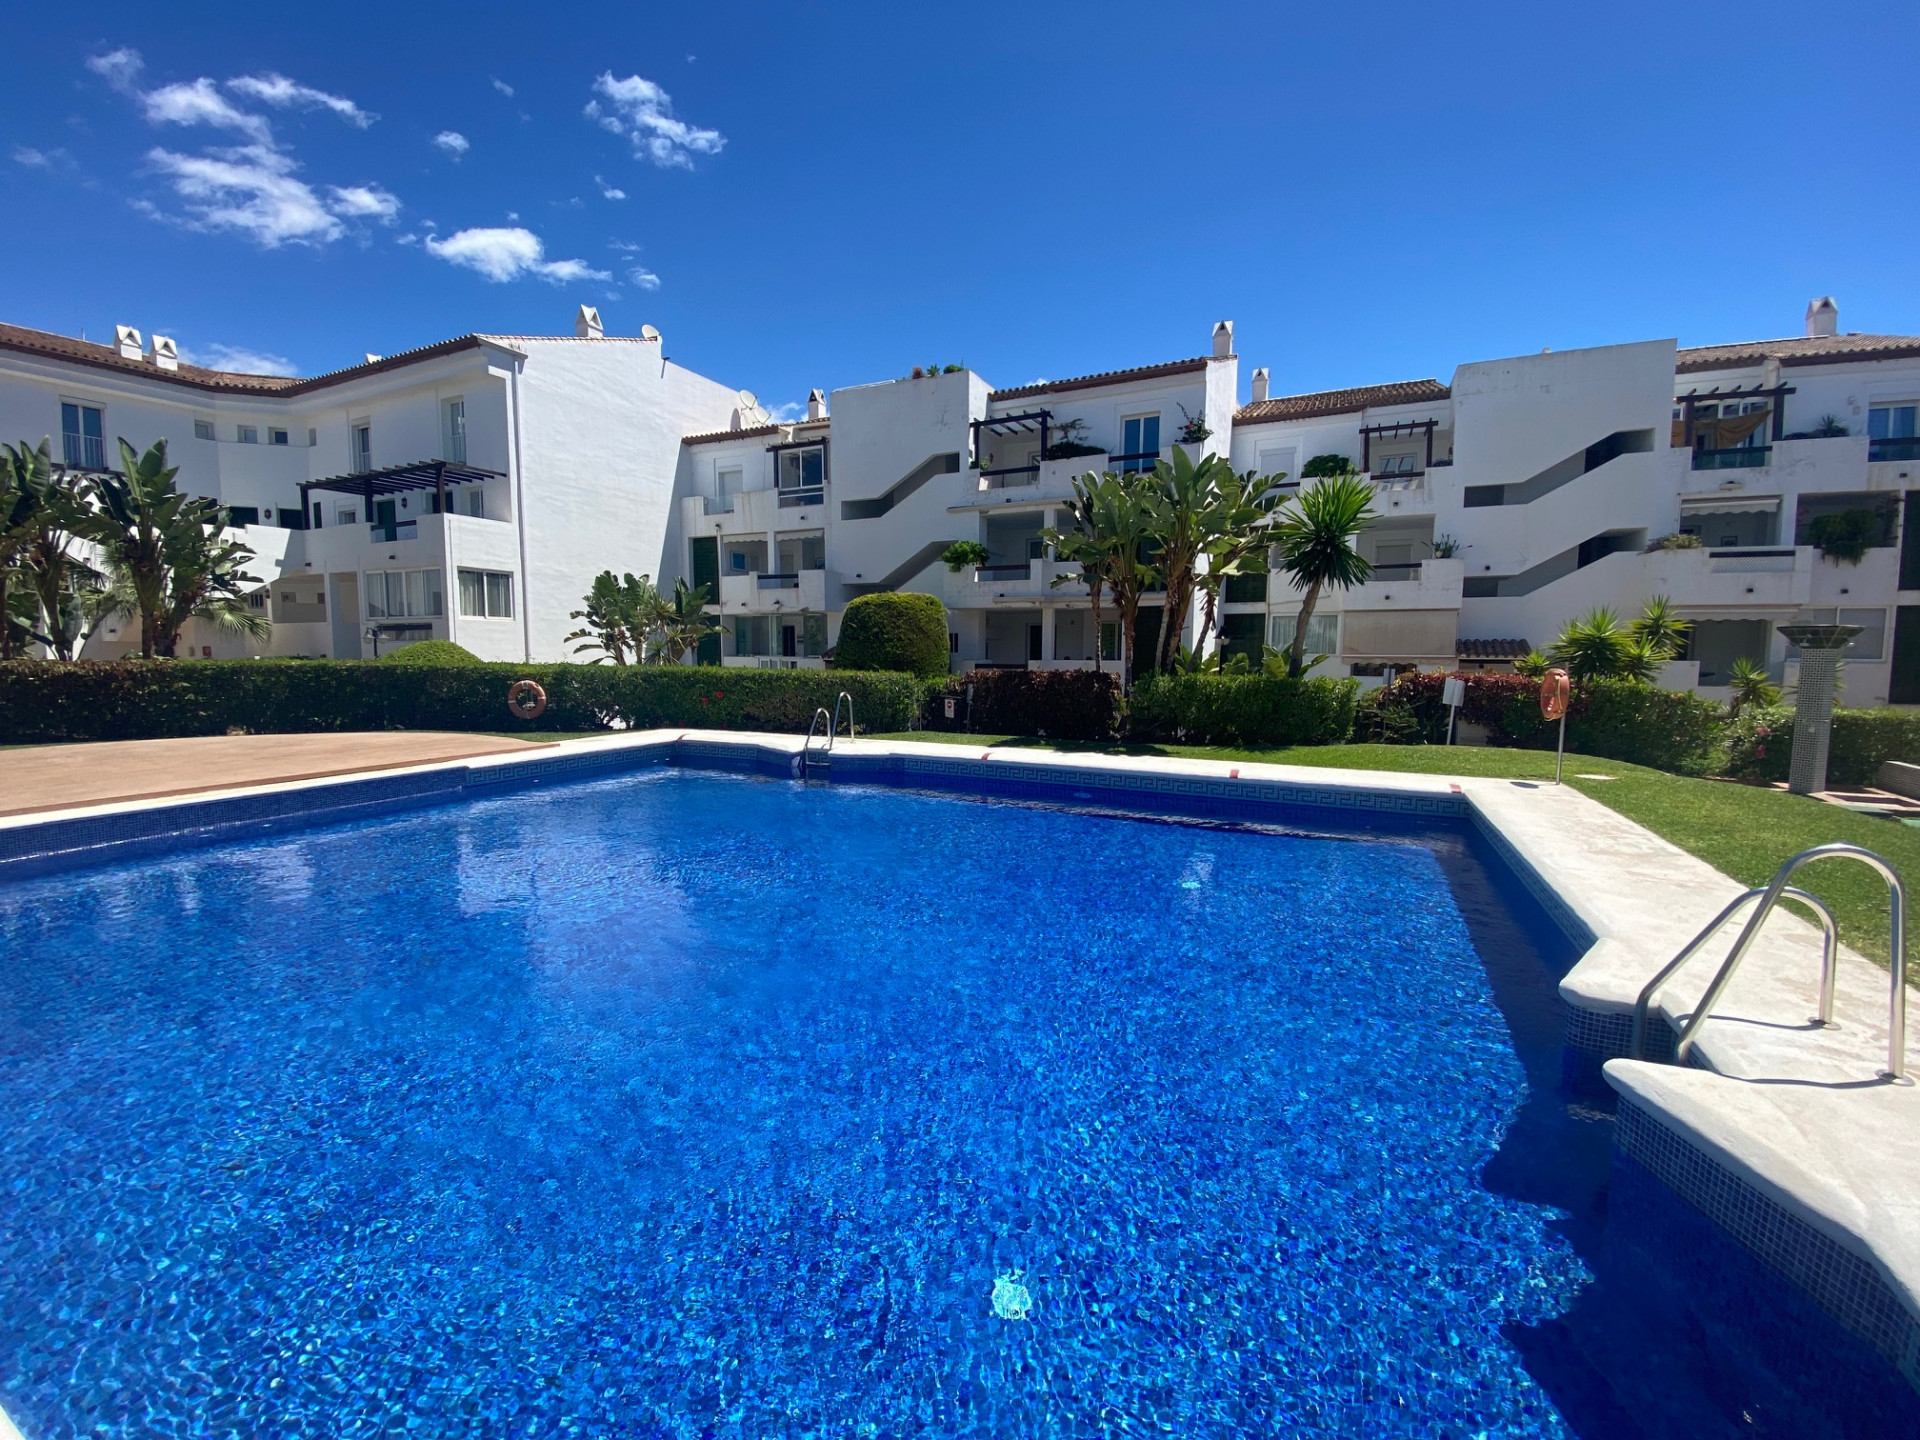 Two bed ground floor apartment in Bel Air Estepona